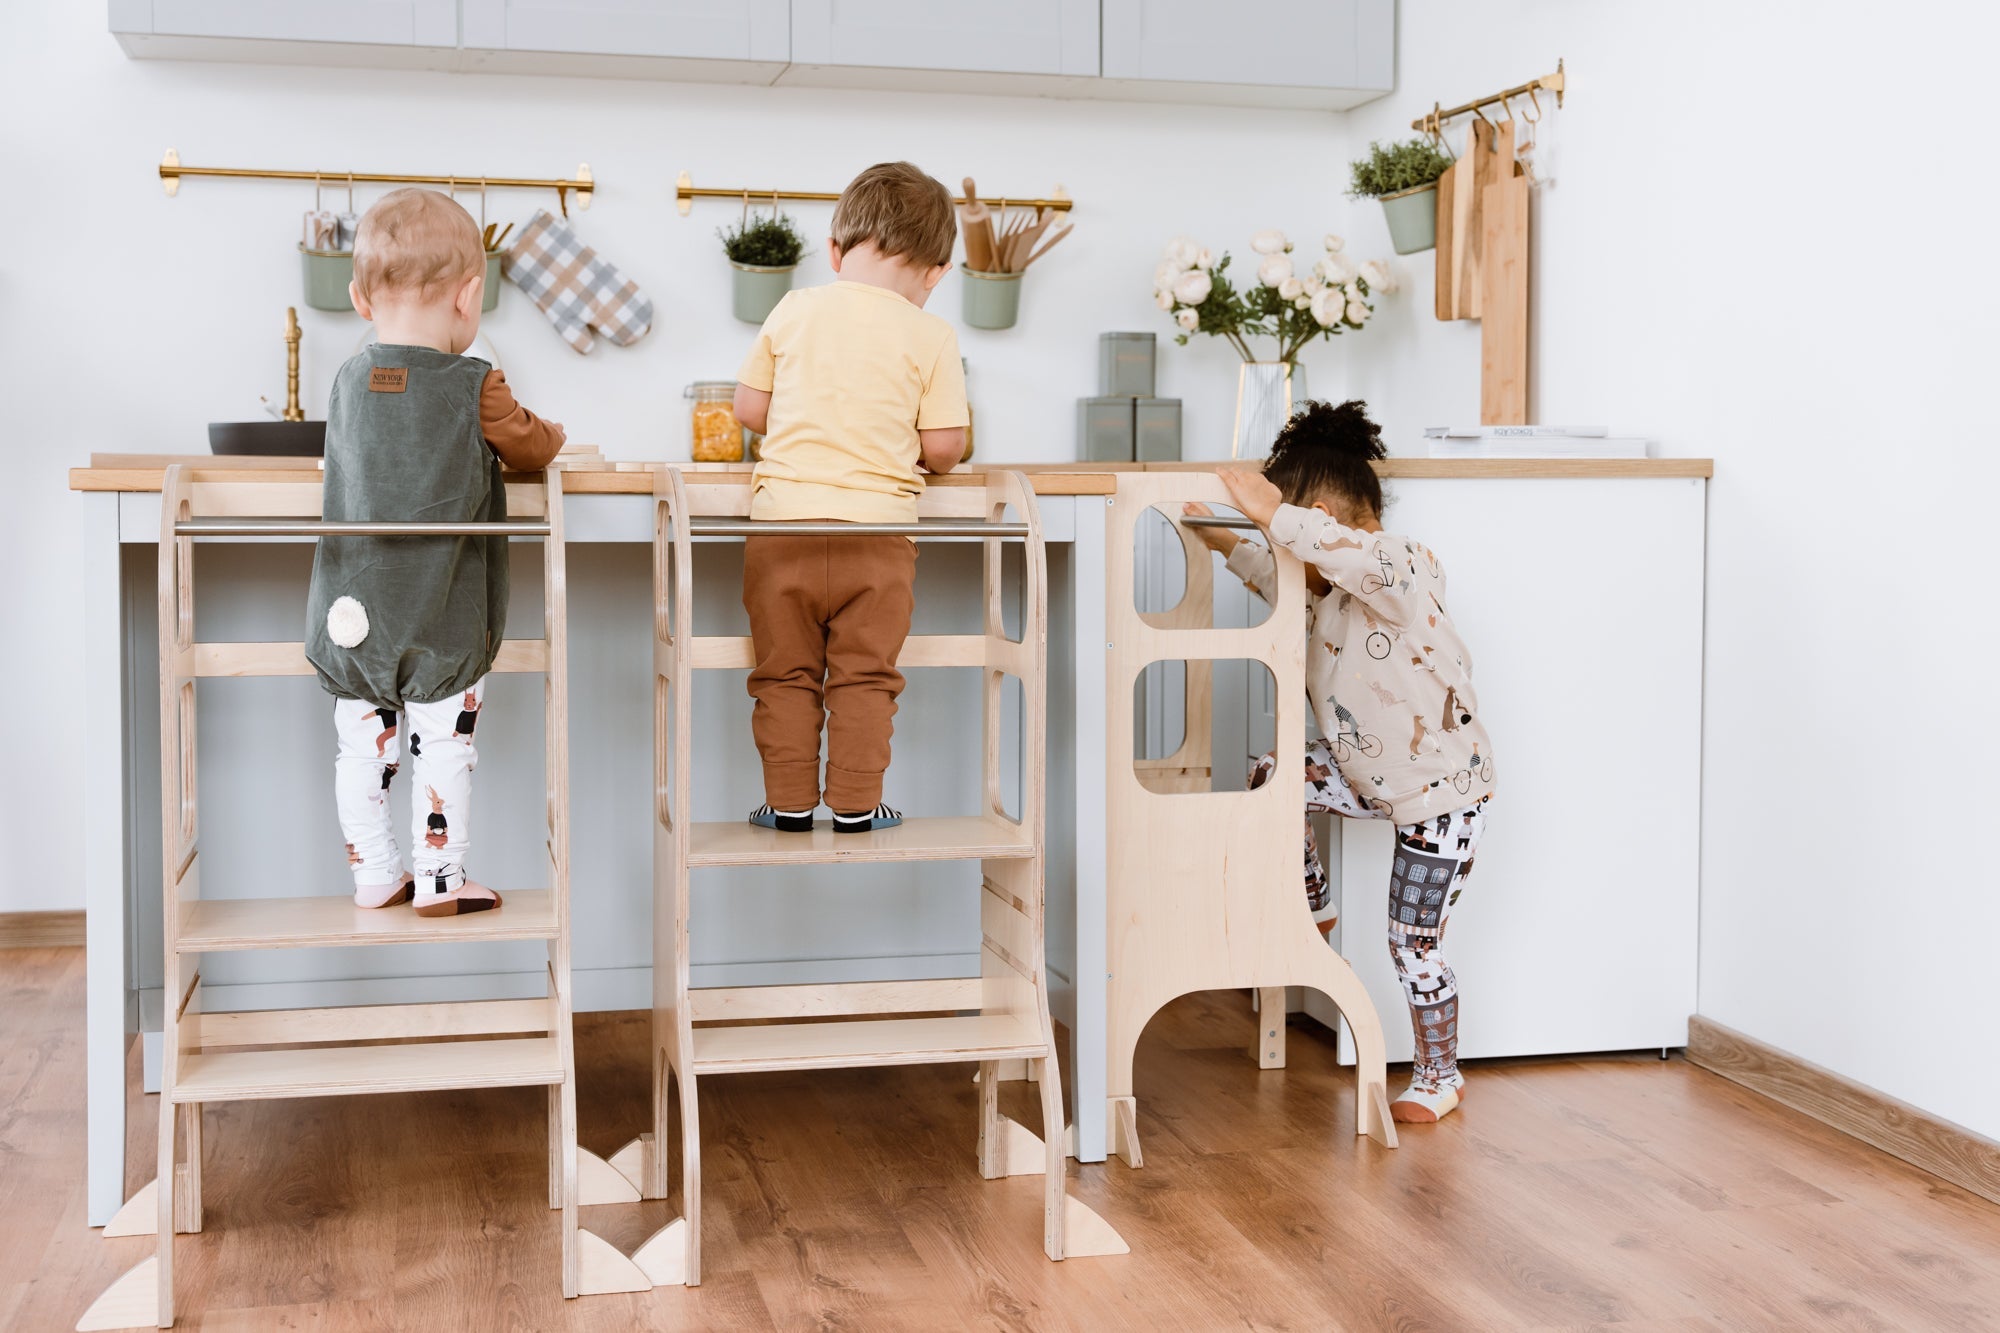 Assist your child's growth with our versatile Help Towers collection, from Learning Towers to Adjustable Helpers, fostering independence and joy."